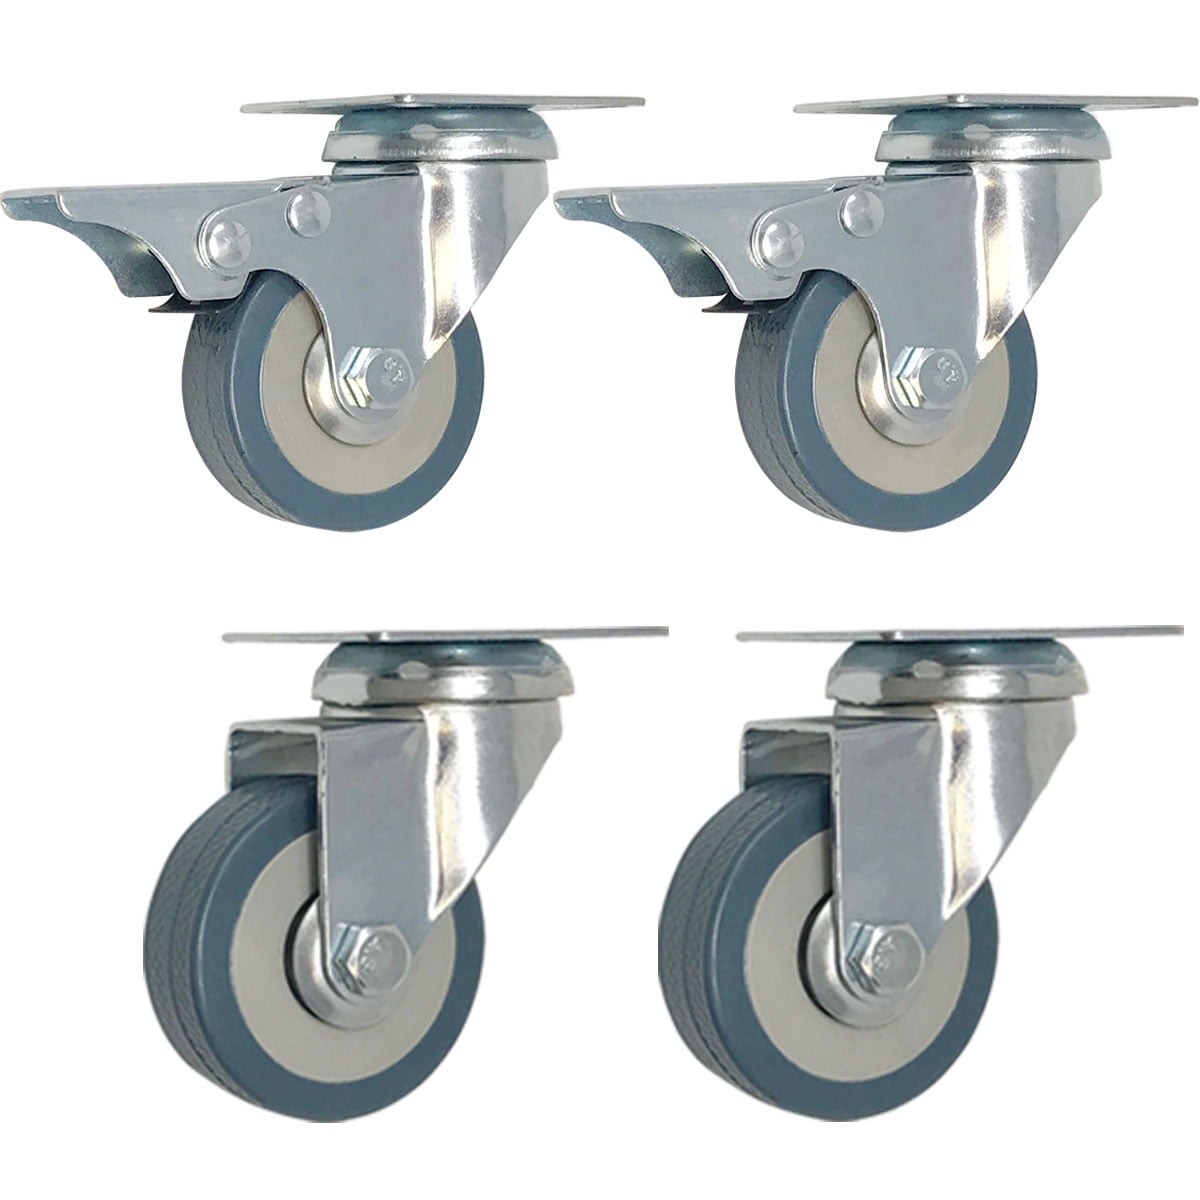 Four-Piece Set Can Rotate 360 Degrees Load 150kg Used in Furniture Pallet Casters Furniture Casters 2.0 Inch 2 with Brakes Cribs Storage Cabinets Universal Wheels 2 Without Brakes